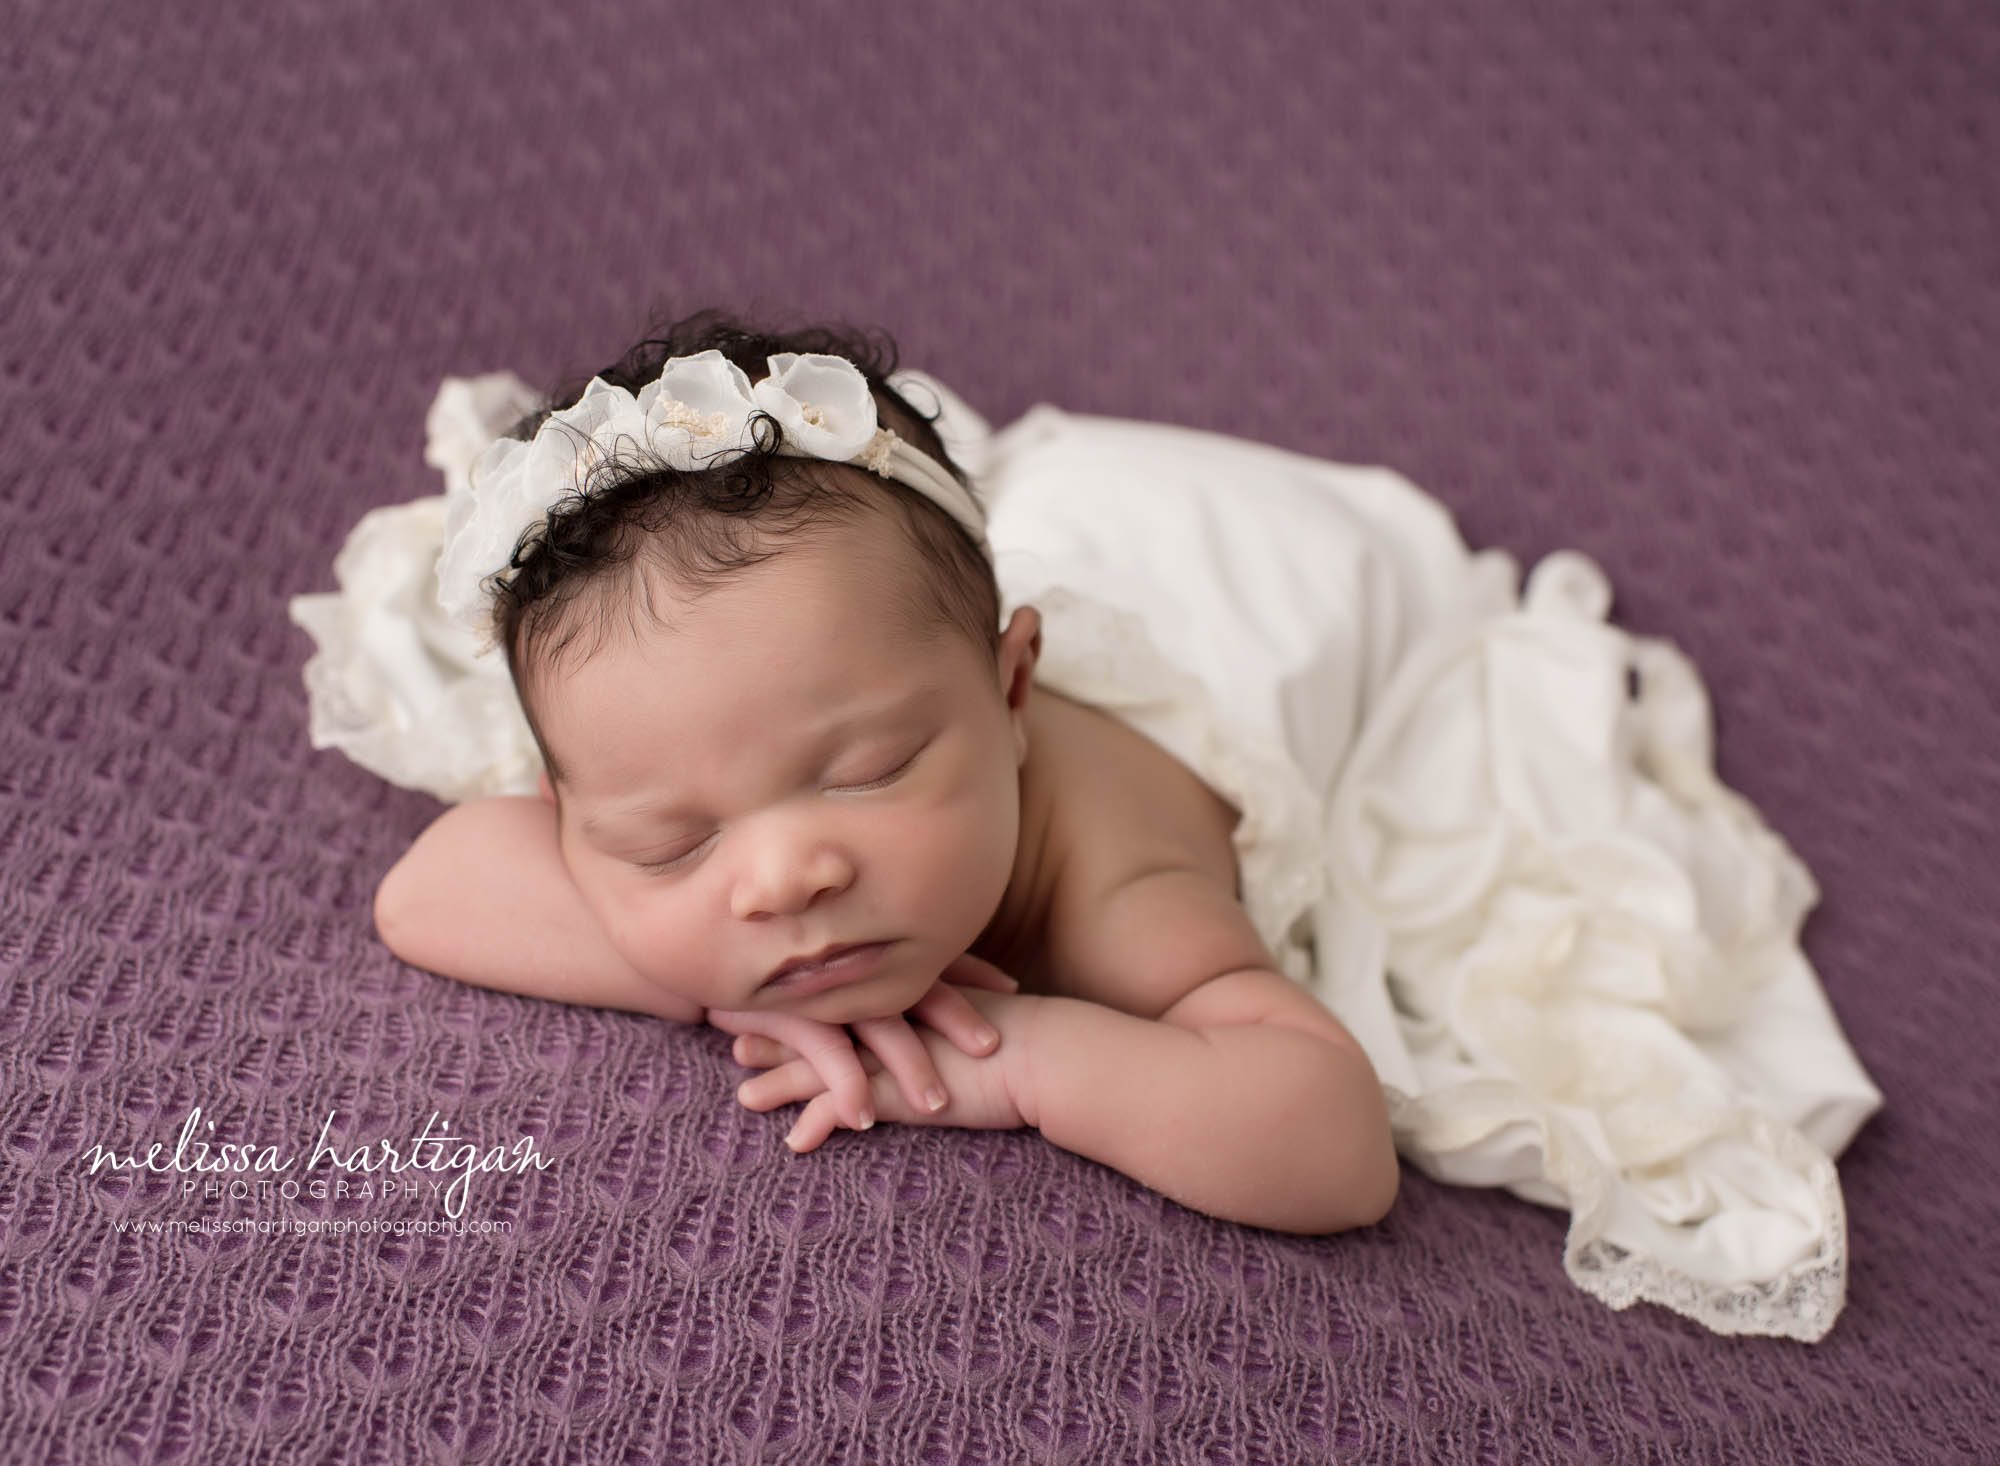 baby girl on purple with cream blanket draped over her posed with head on hands